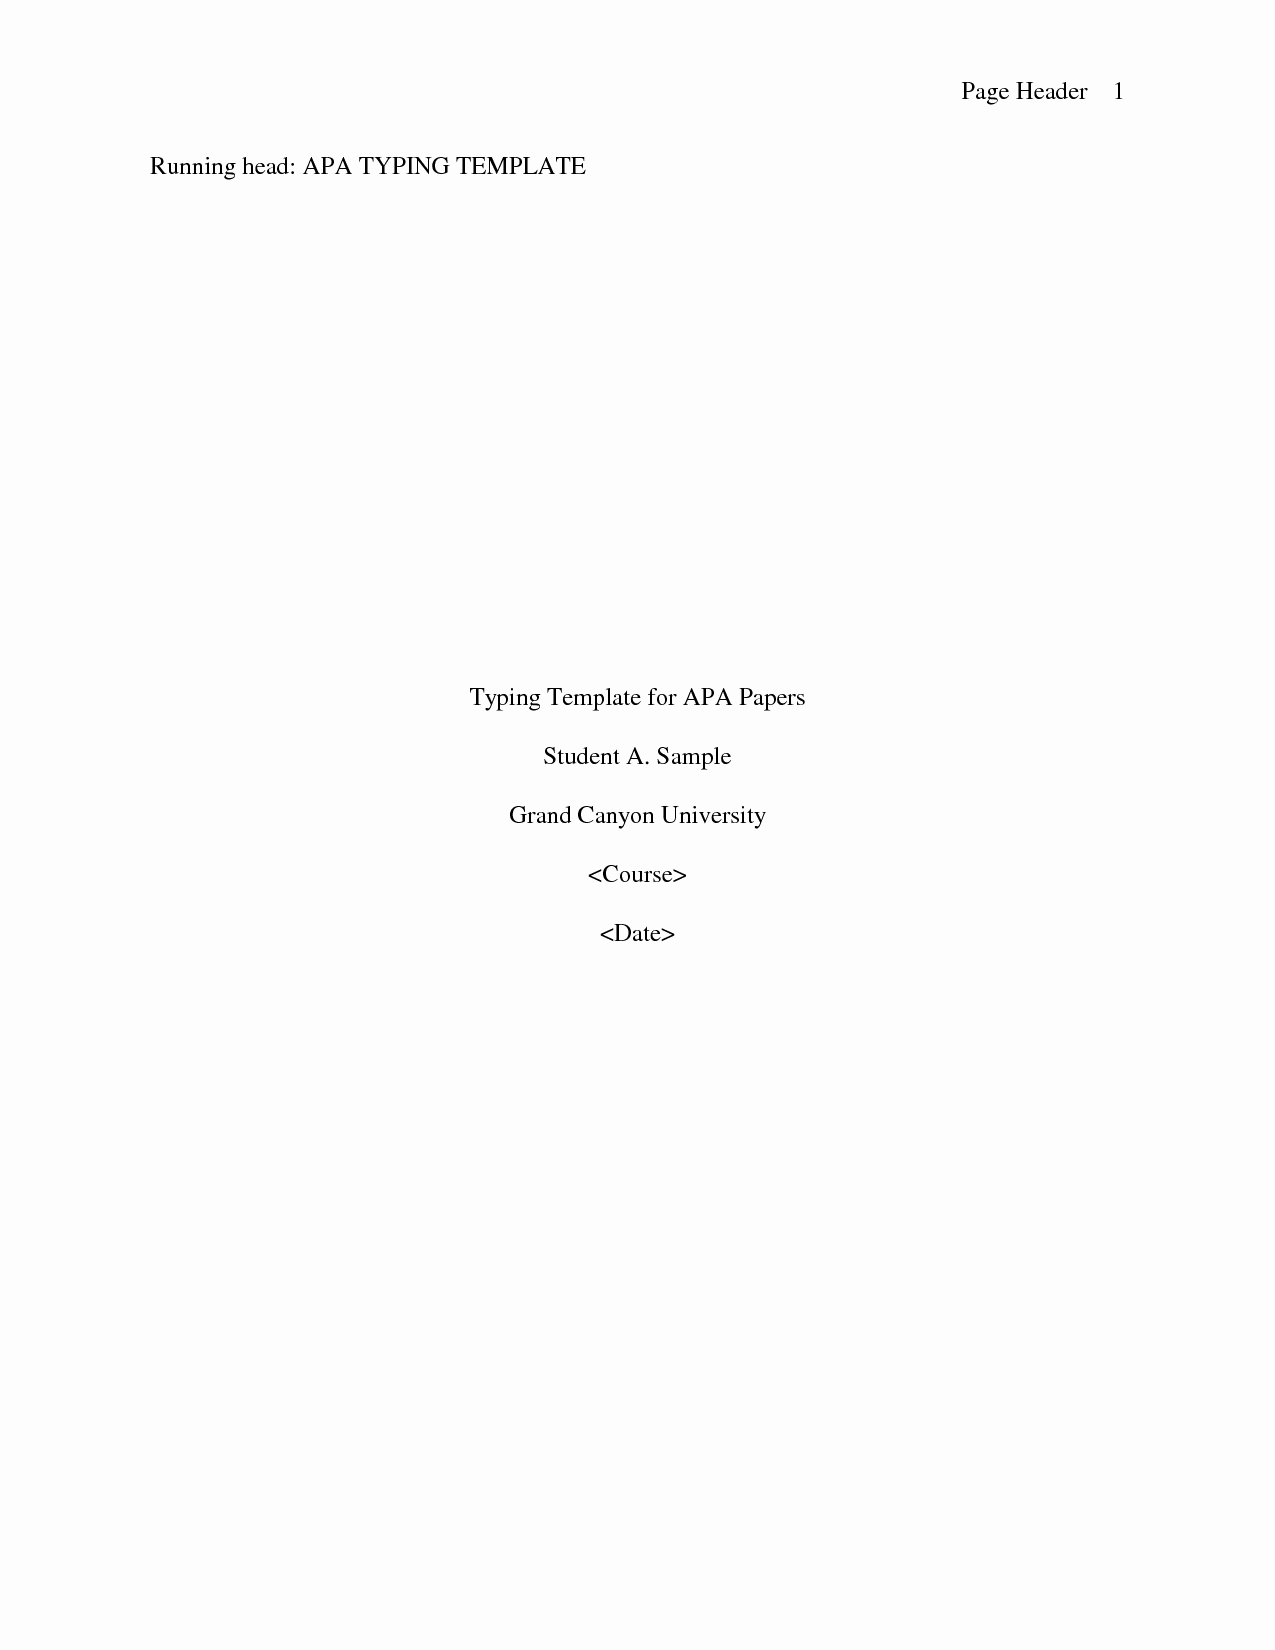 Sample Title Page Apa Style Inspirational Sample Title Page for Research Paper Apa format